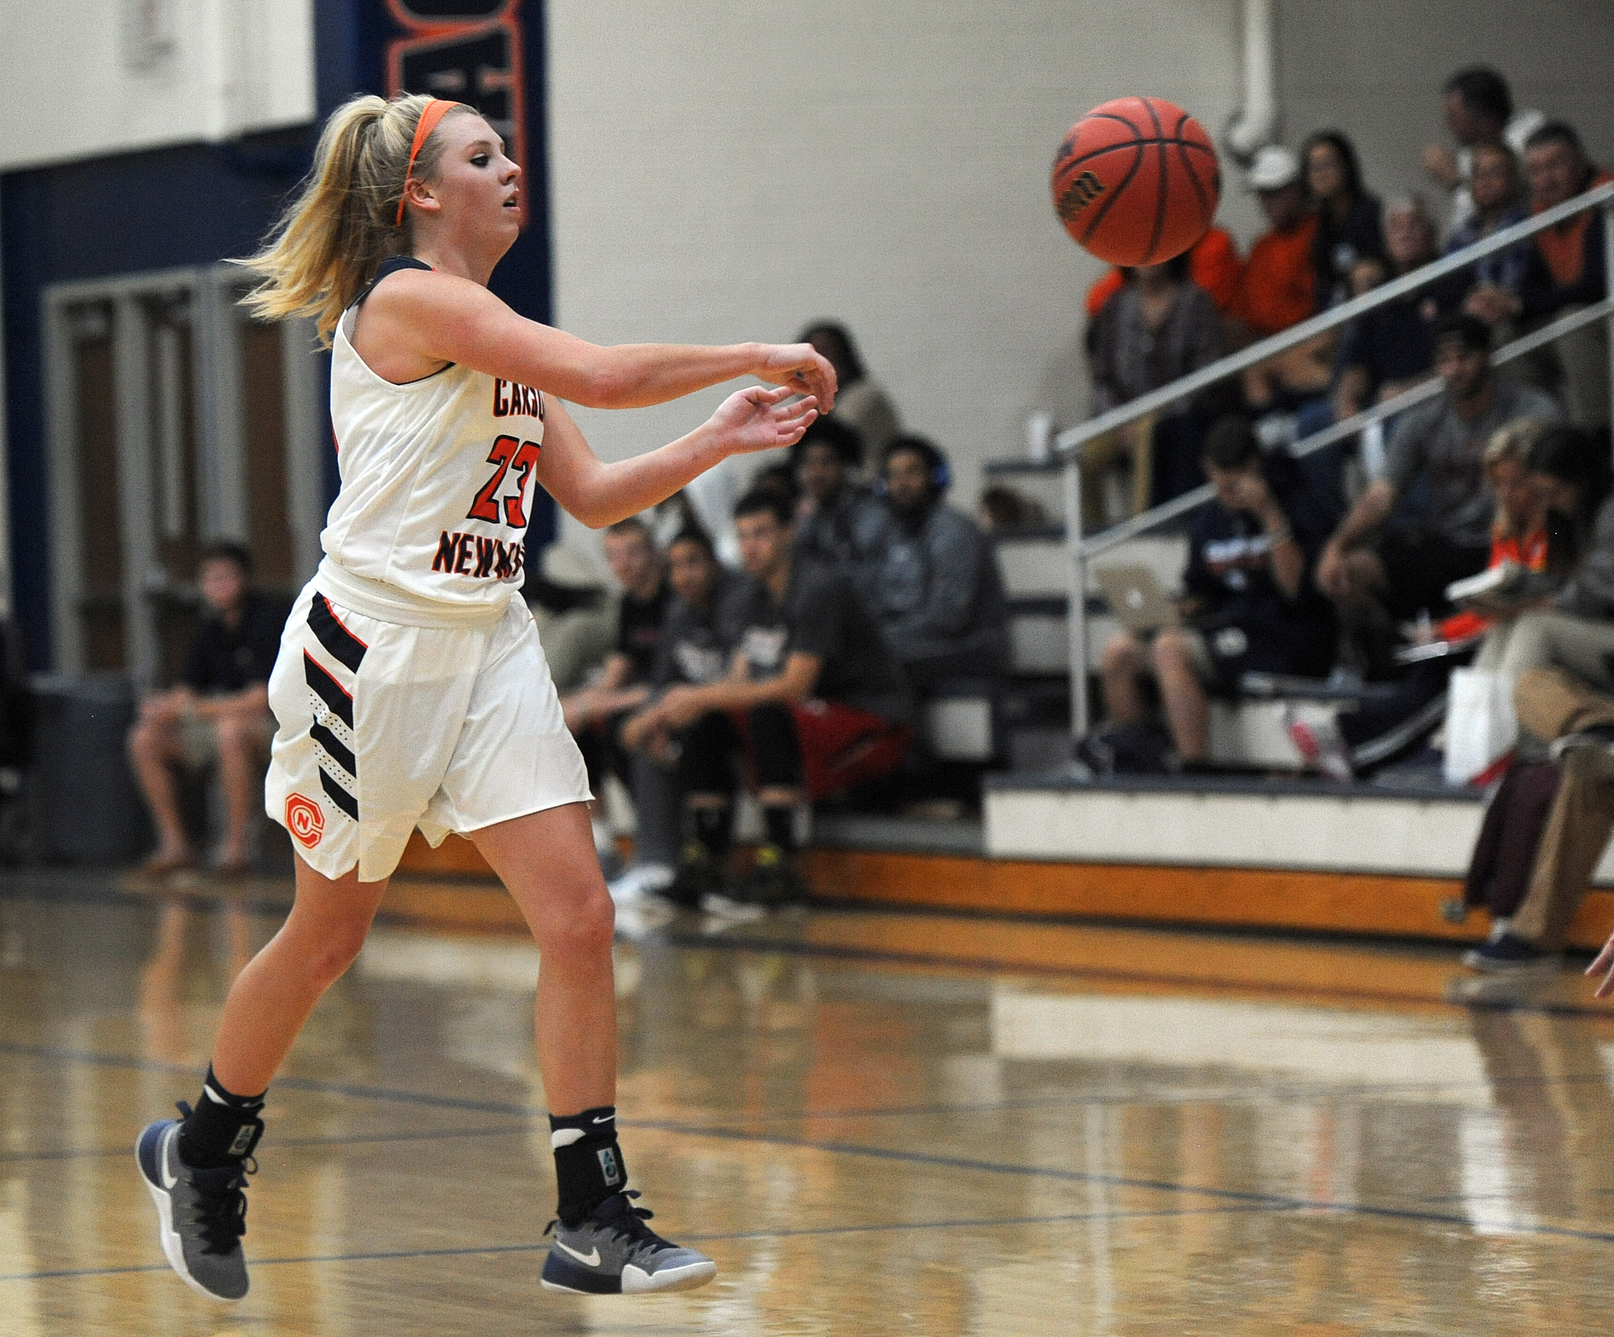 SAC-Record 38 assists leads Lady Eagles over Royals 114-45